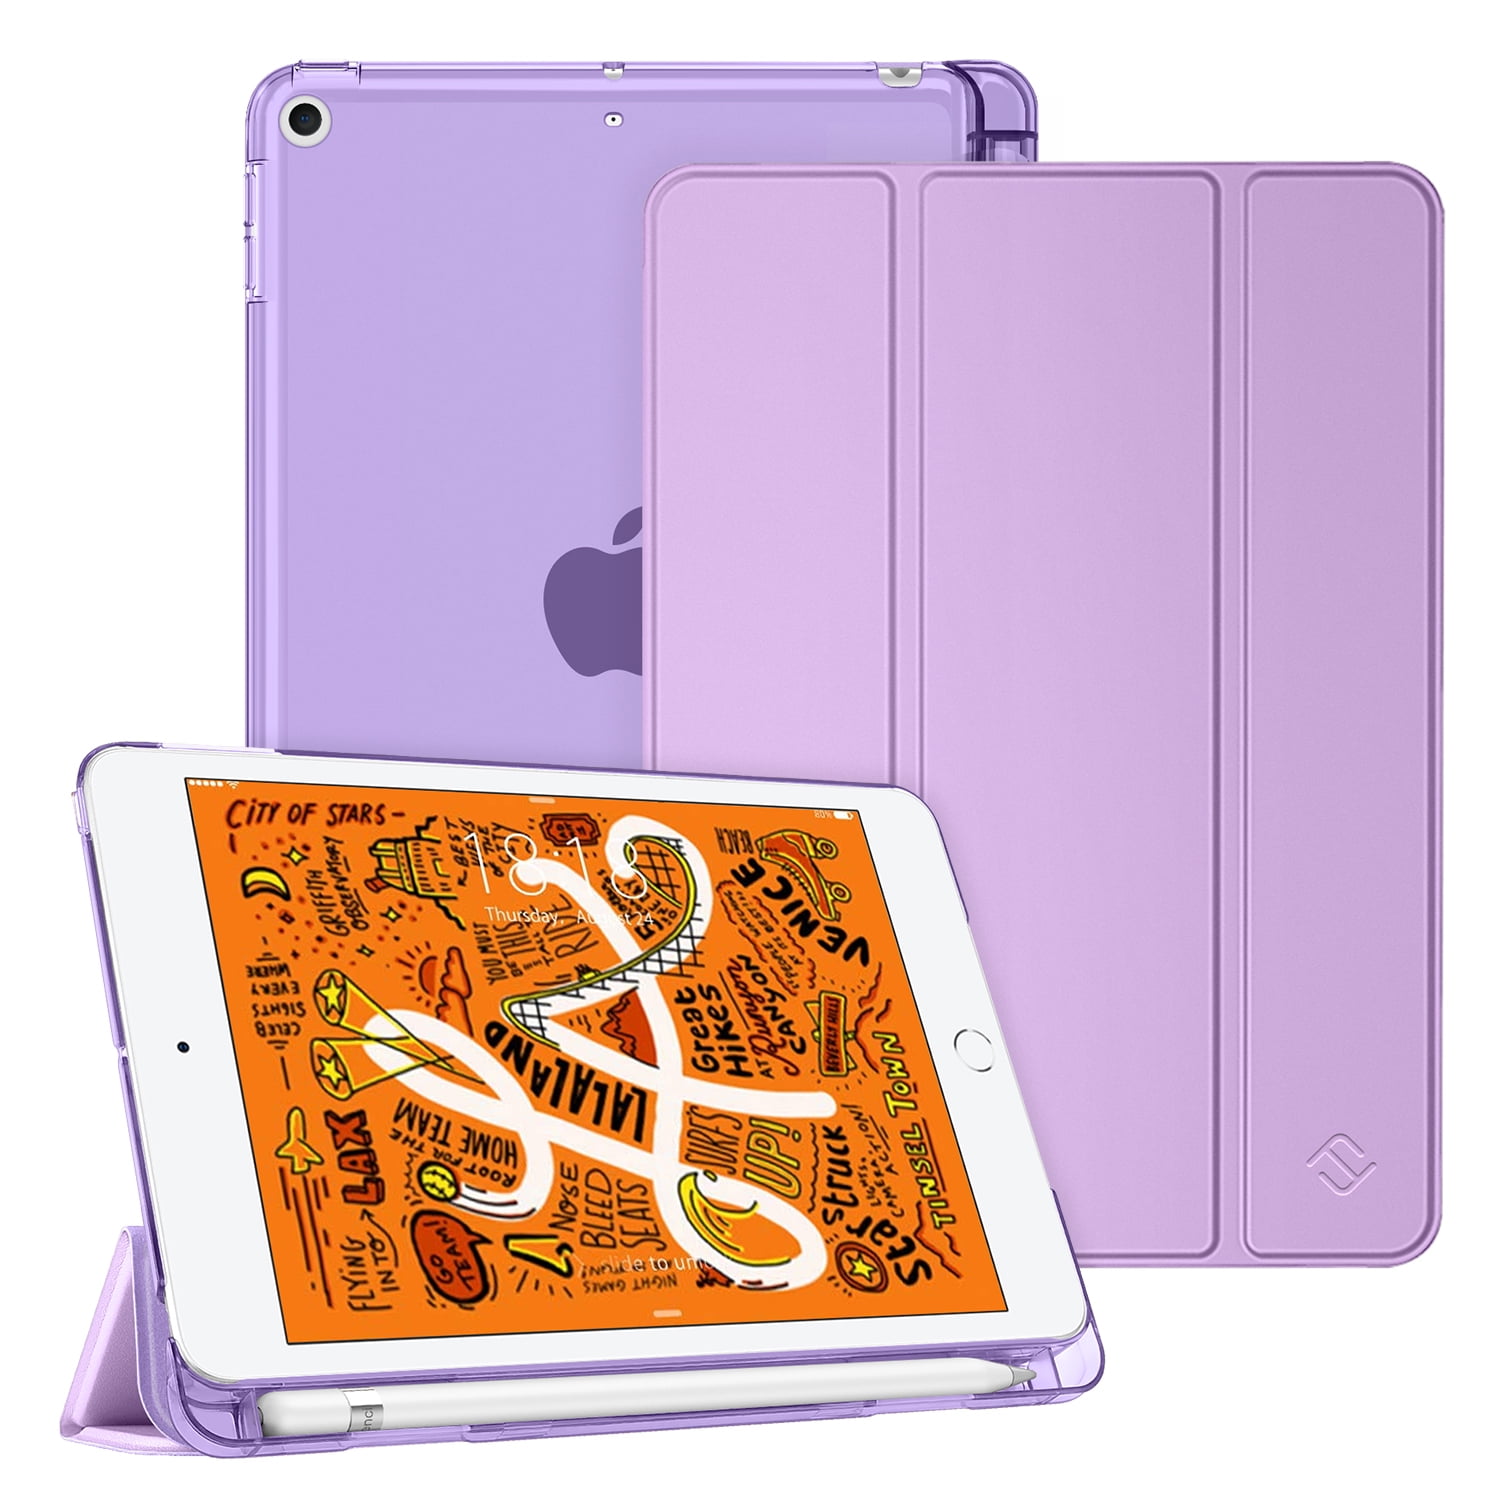 Reactionnx Smart Rubber Folio Hard Frosted Cover for iPad Mini 5 